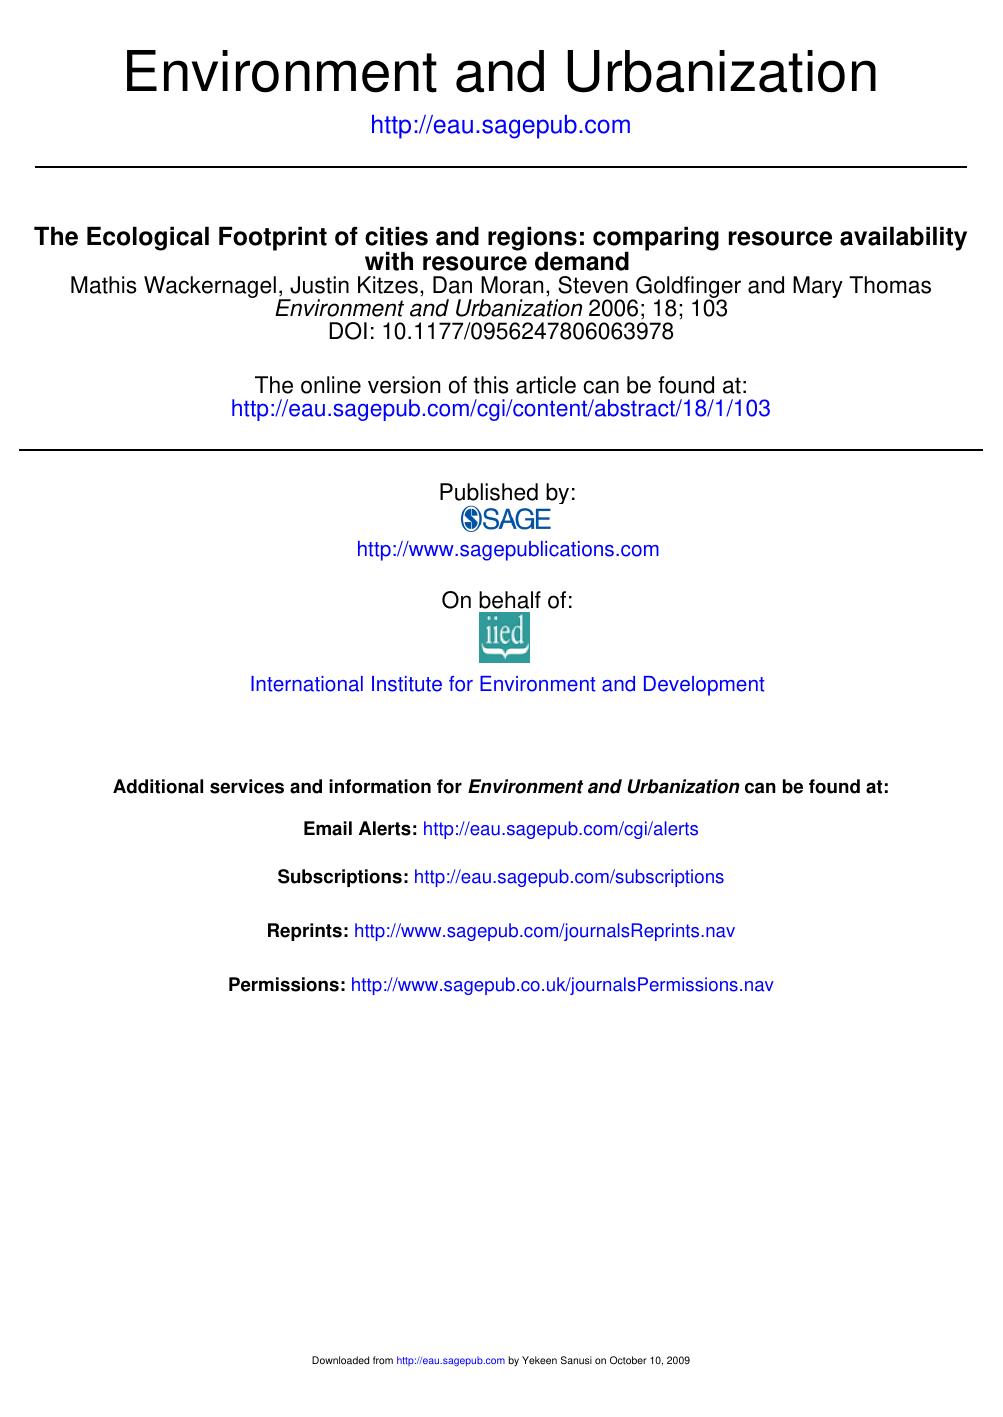 The Ecological Footprint of cities and regions comparing resource availability with resources demand, 2006